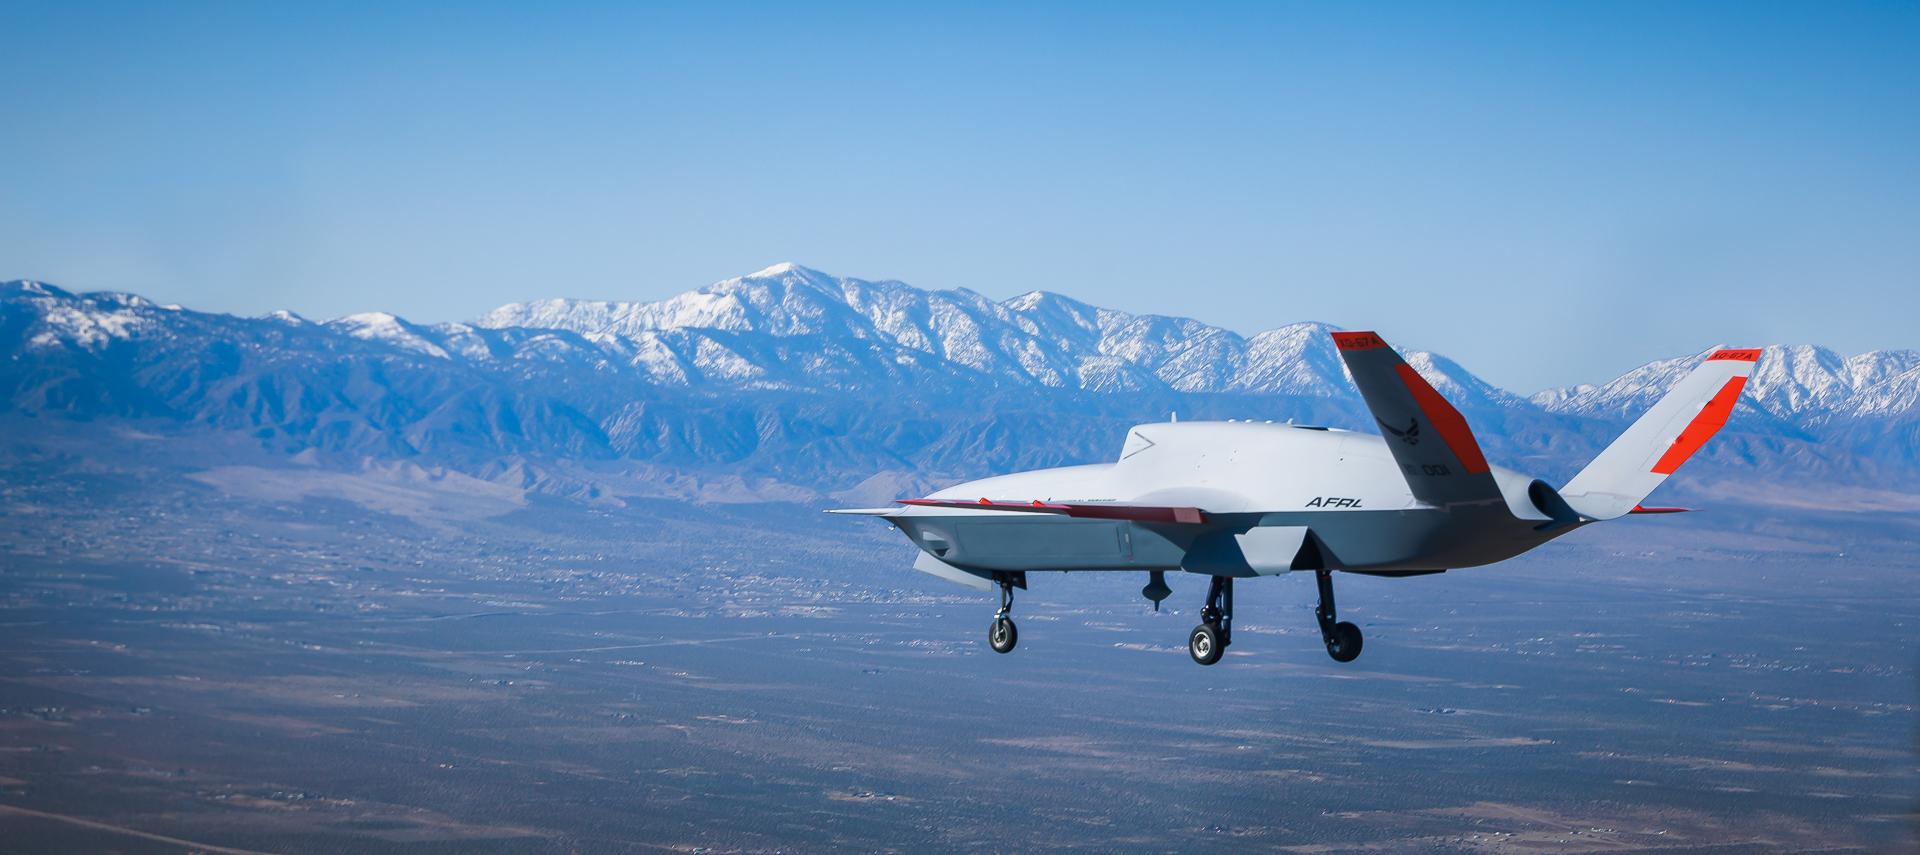 AFRL’s XQ-67A Off Board Sensing Station, or OBSS, designed and built by General Atomics, took its maiden flight Feb. 28 from Gray Butte Field Airport, Palmdale, California. XQ-67A completed several test points and safely recovered on the first of a series of flight tests. The XQ-67A is the first of a second generation of autonomous collaborative platforms, or ACP.(Courtesy photo.)